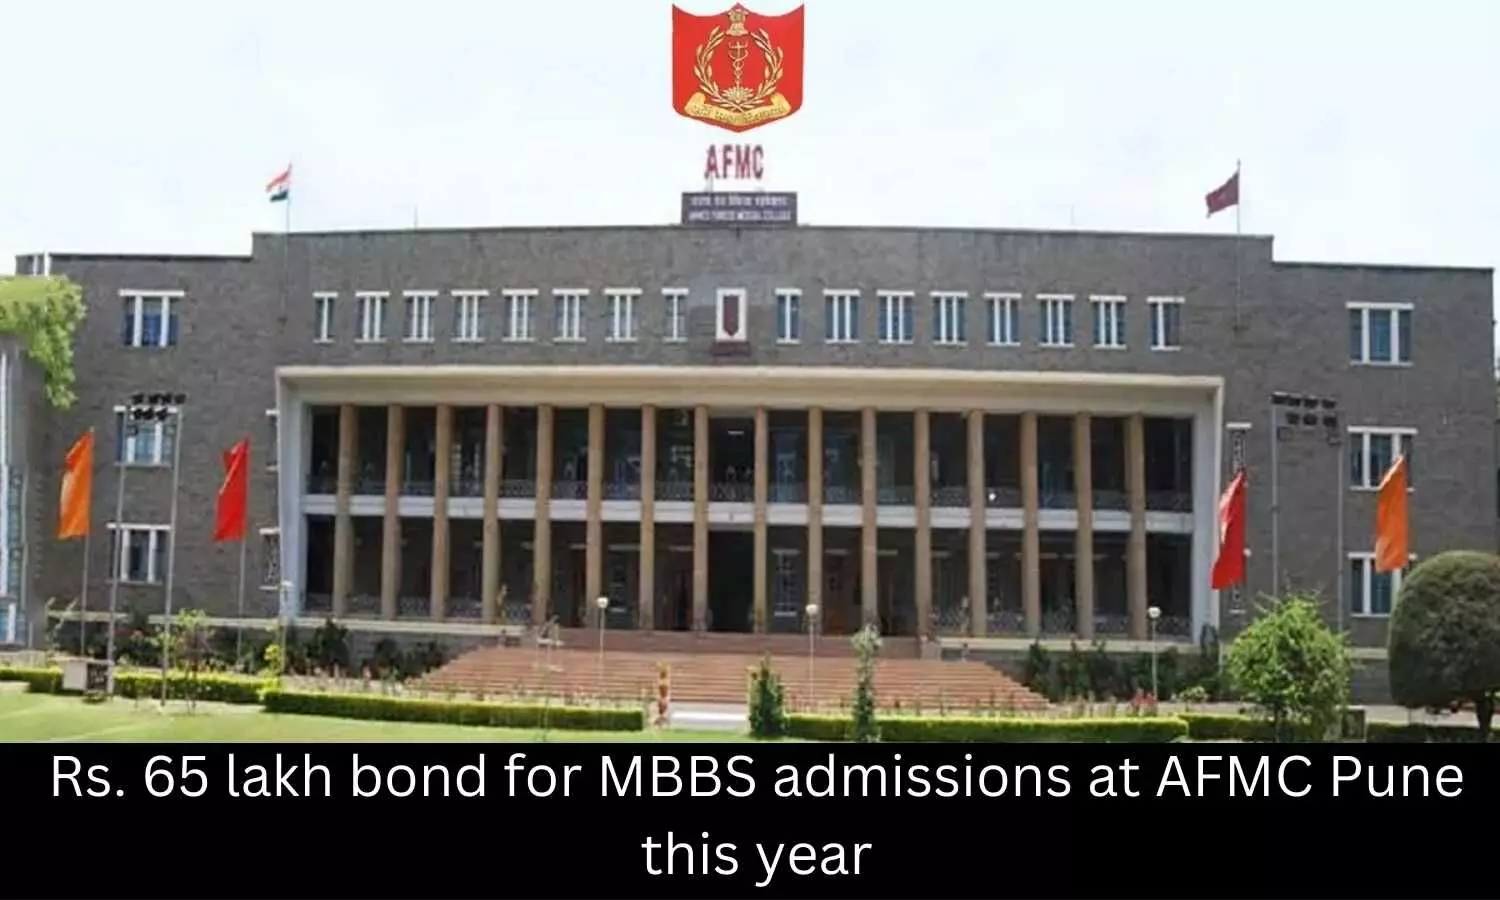 Bond fee for MBBS admissions at AFMC Pune increased from 61 lakh to 65 lakh